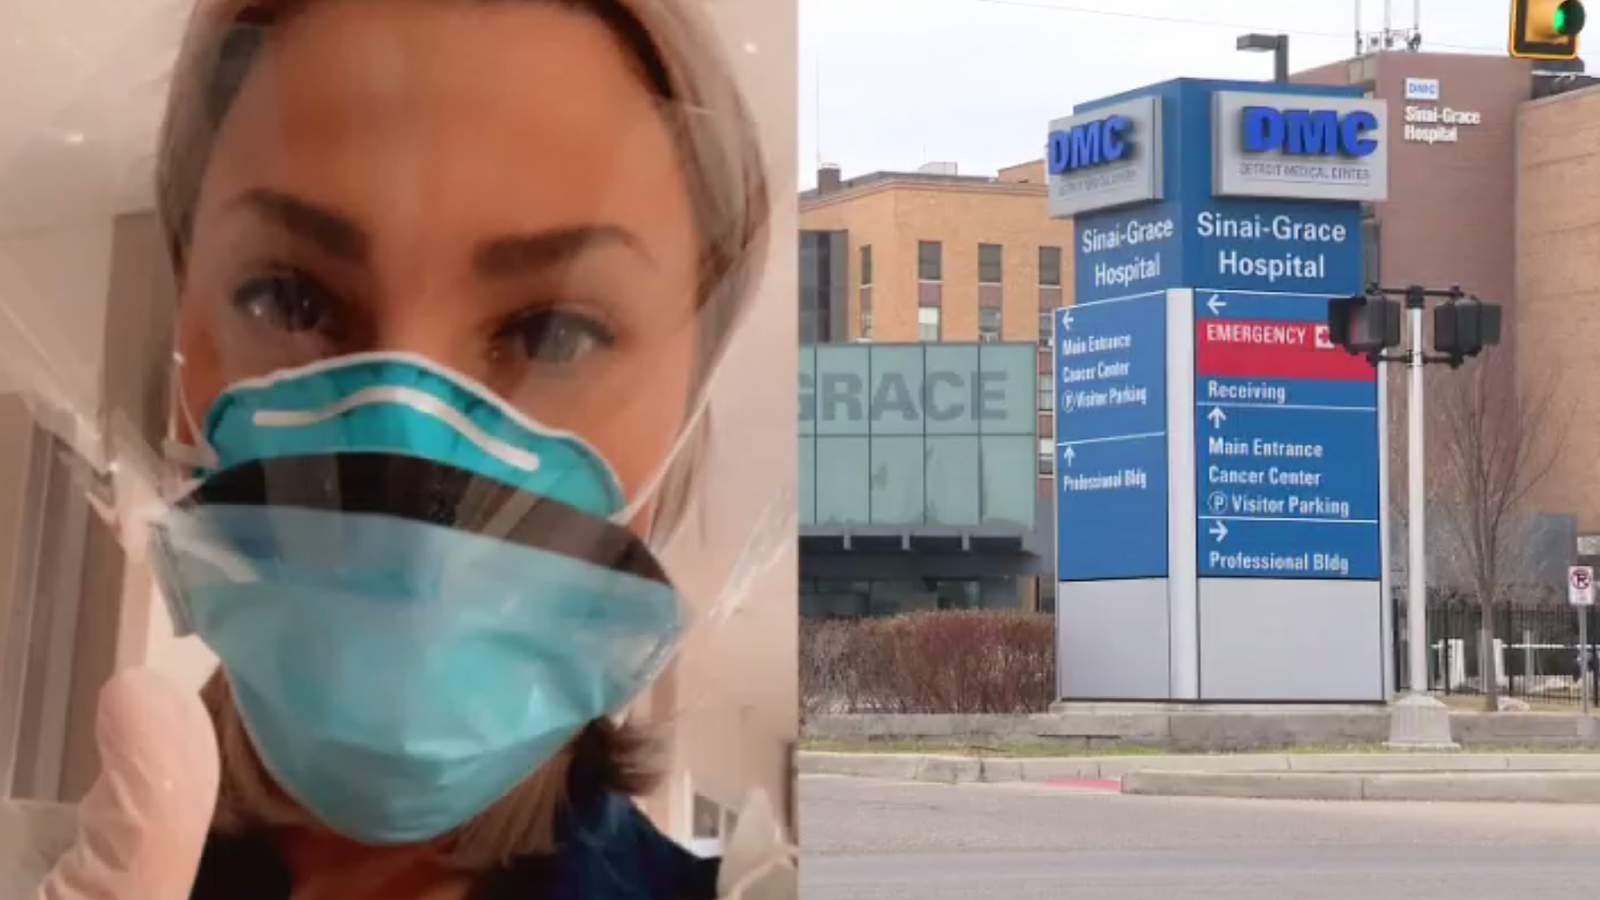 Nurse fired from Sinai-Grace Hospital for video showing COVID-19 precautions sues Detroit Medical Center